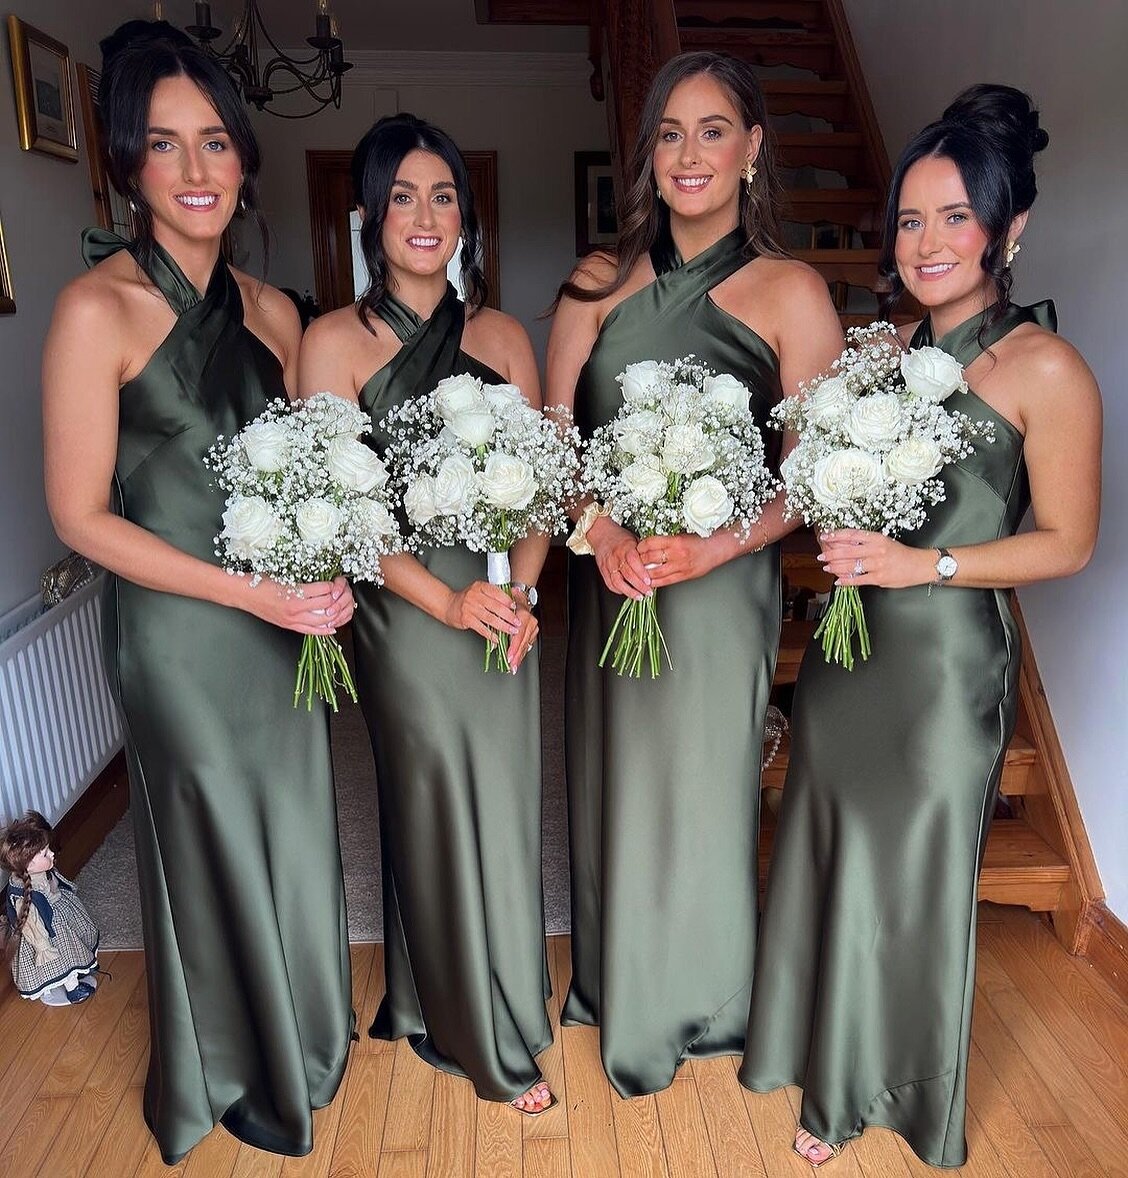 Obsessed with makeup artists like @rachaeldonnellymakeup_1 that capture 📸 bridesmaids in full glam 🤩🤩🤩 

Bridesmaids wearing the LB025 by @dessygroup in the brand new Olive Green 🍃🍸

Hair by @emmafinlay37 🤍
_________________________________
#m